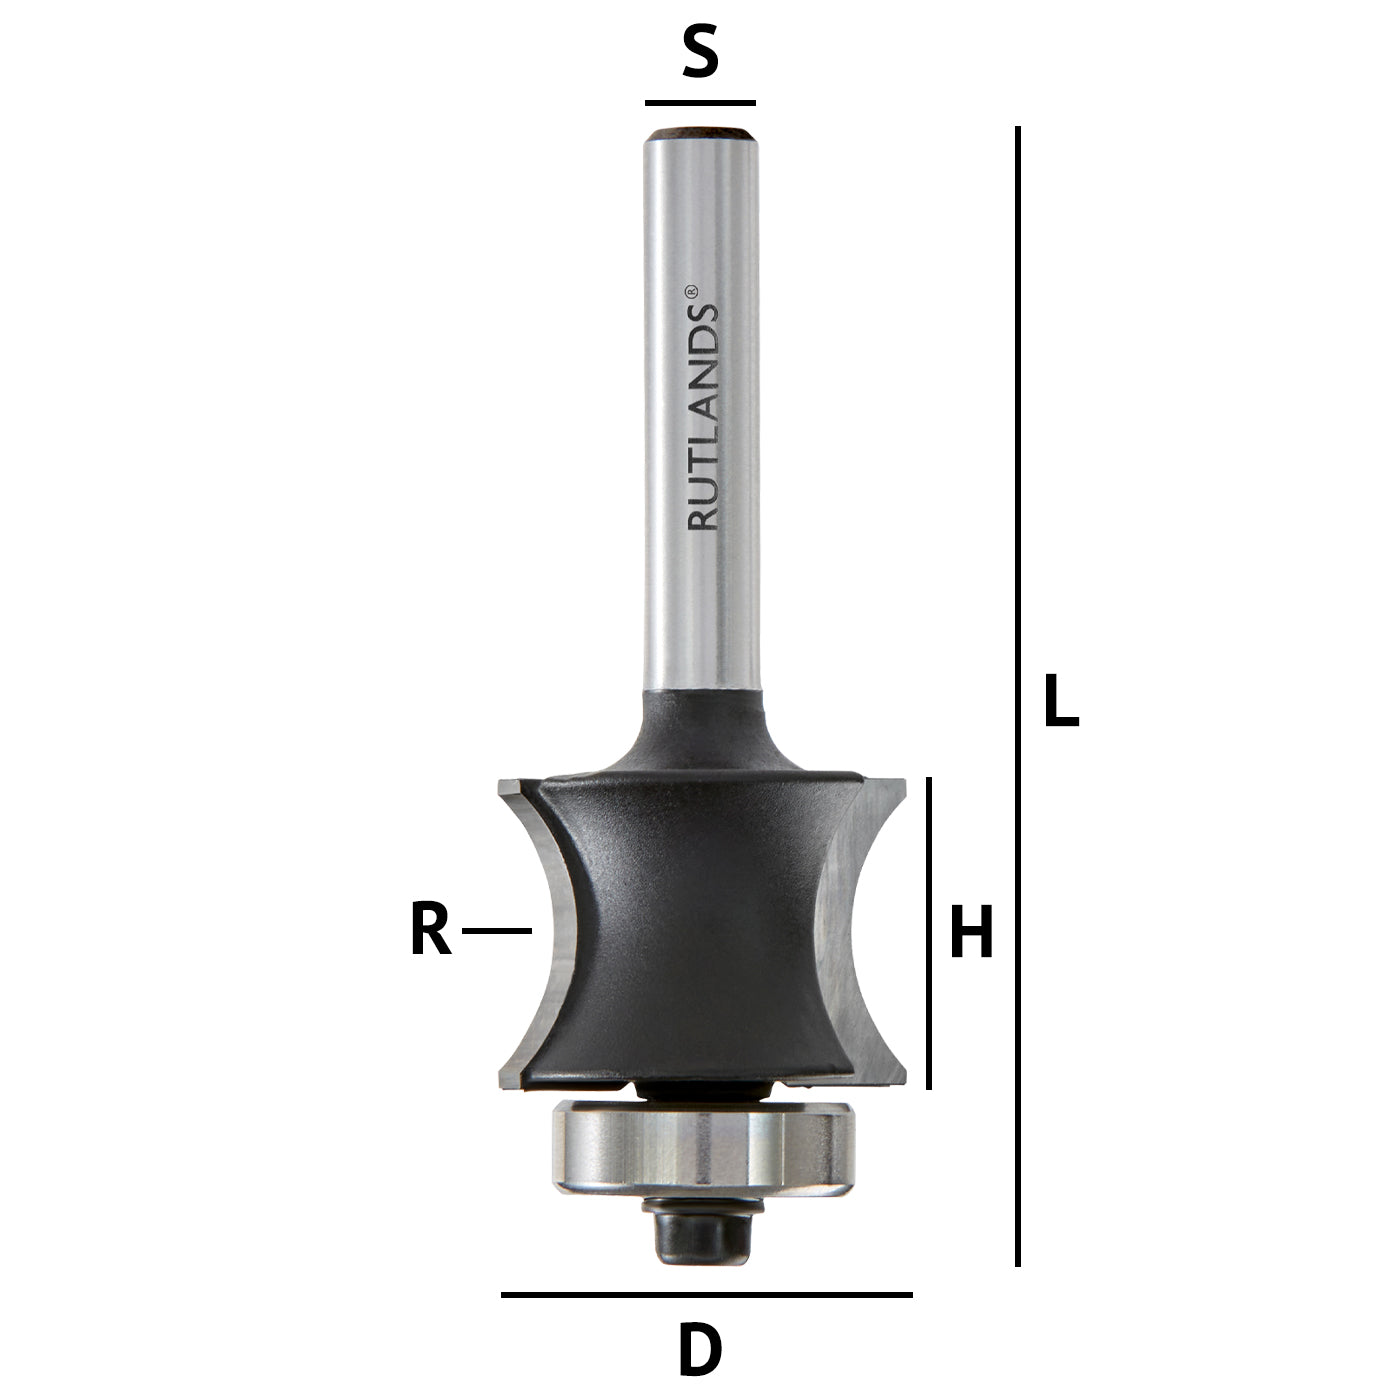 Router Bit - Sunk Bead with Bearing - D=22mm H=16mm R=10mm L=60mm S=1/4"